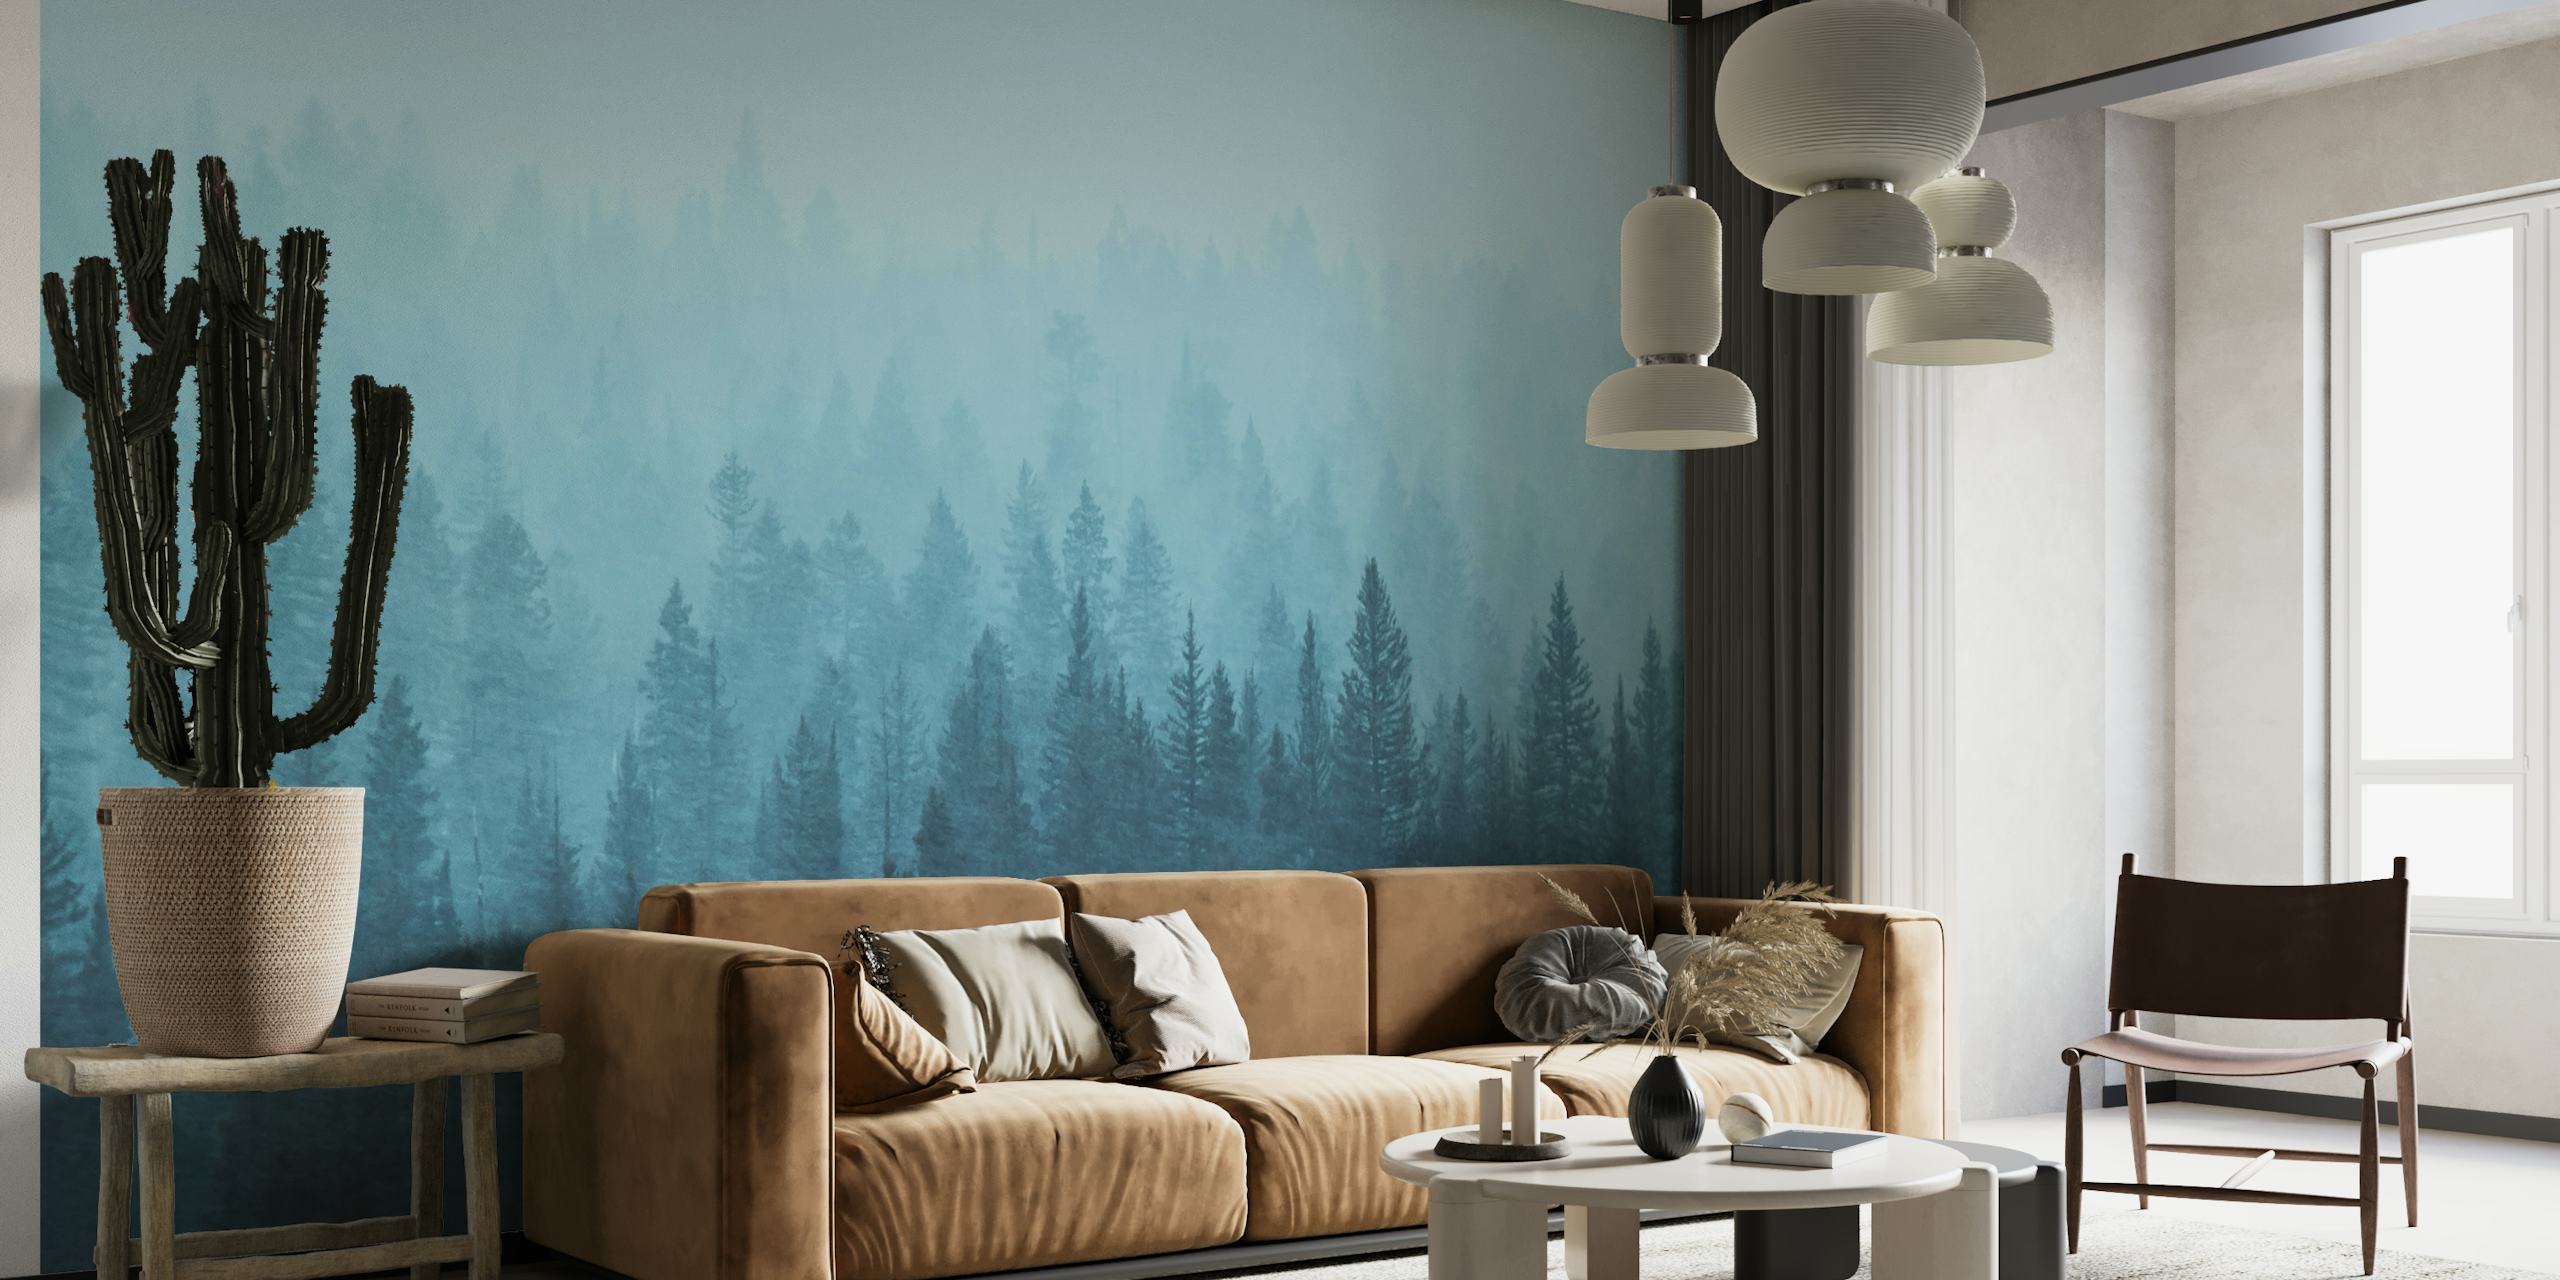 Blue misty forest wall mural with silhouette trees